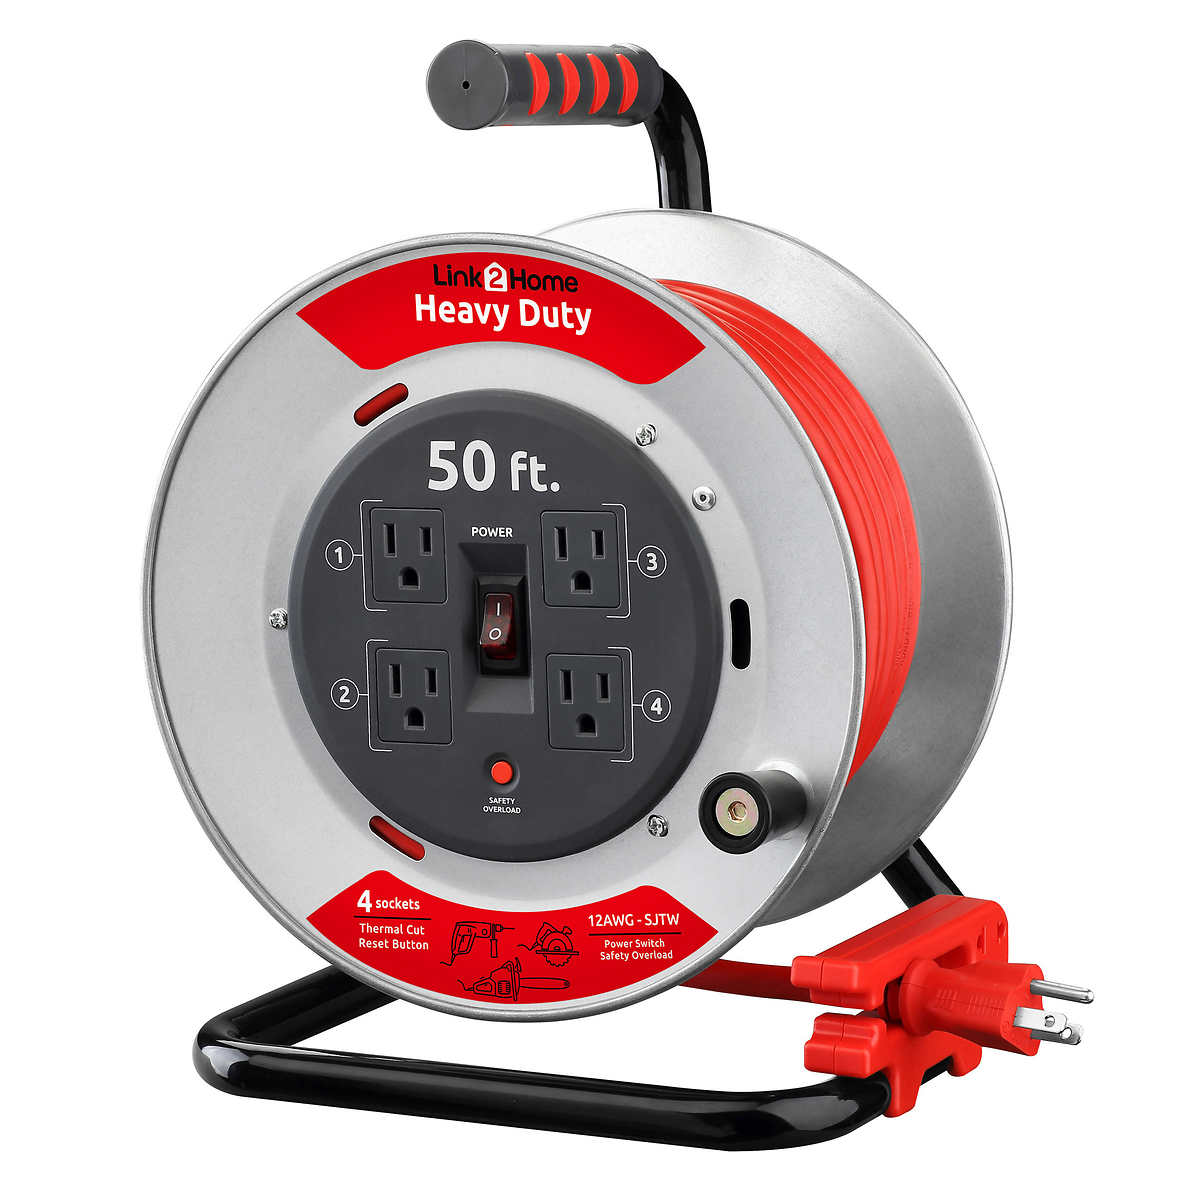 Link2Home Heavy Duty Professional Grade Metal Cord Reel – High Visibility  50 ft. 12 AWG SJTW Extension Cord with 4 Power Outlets